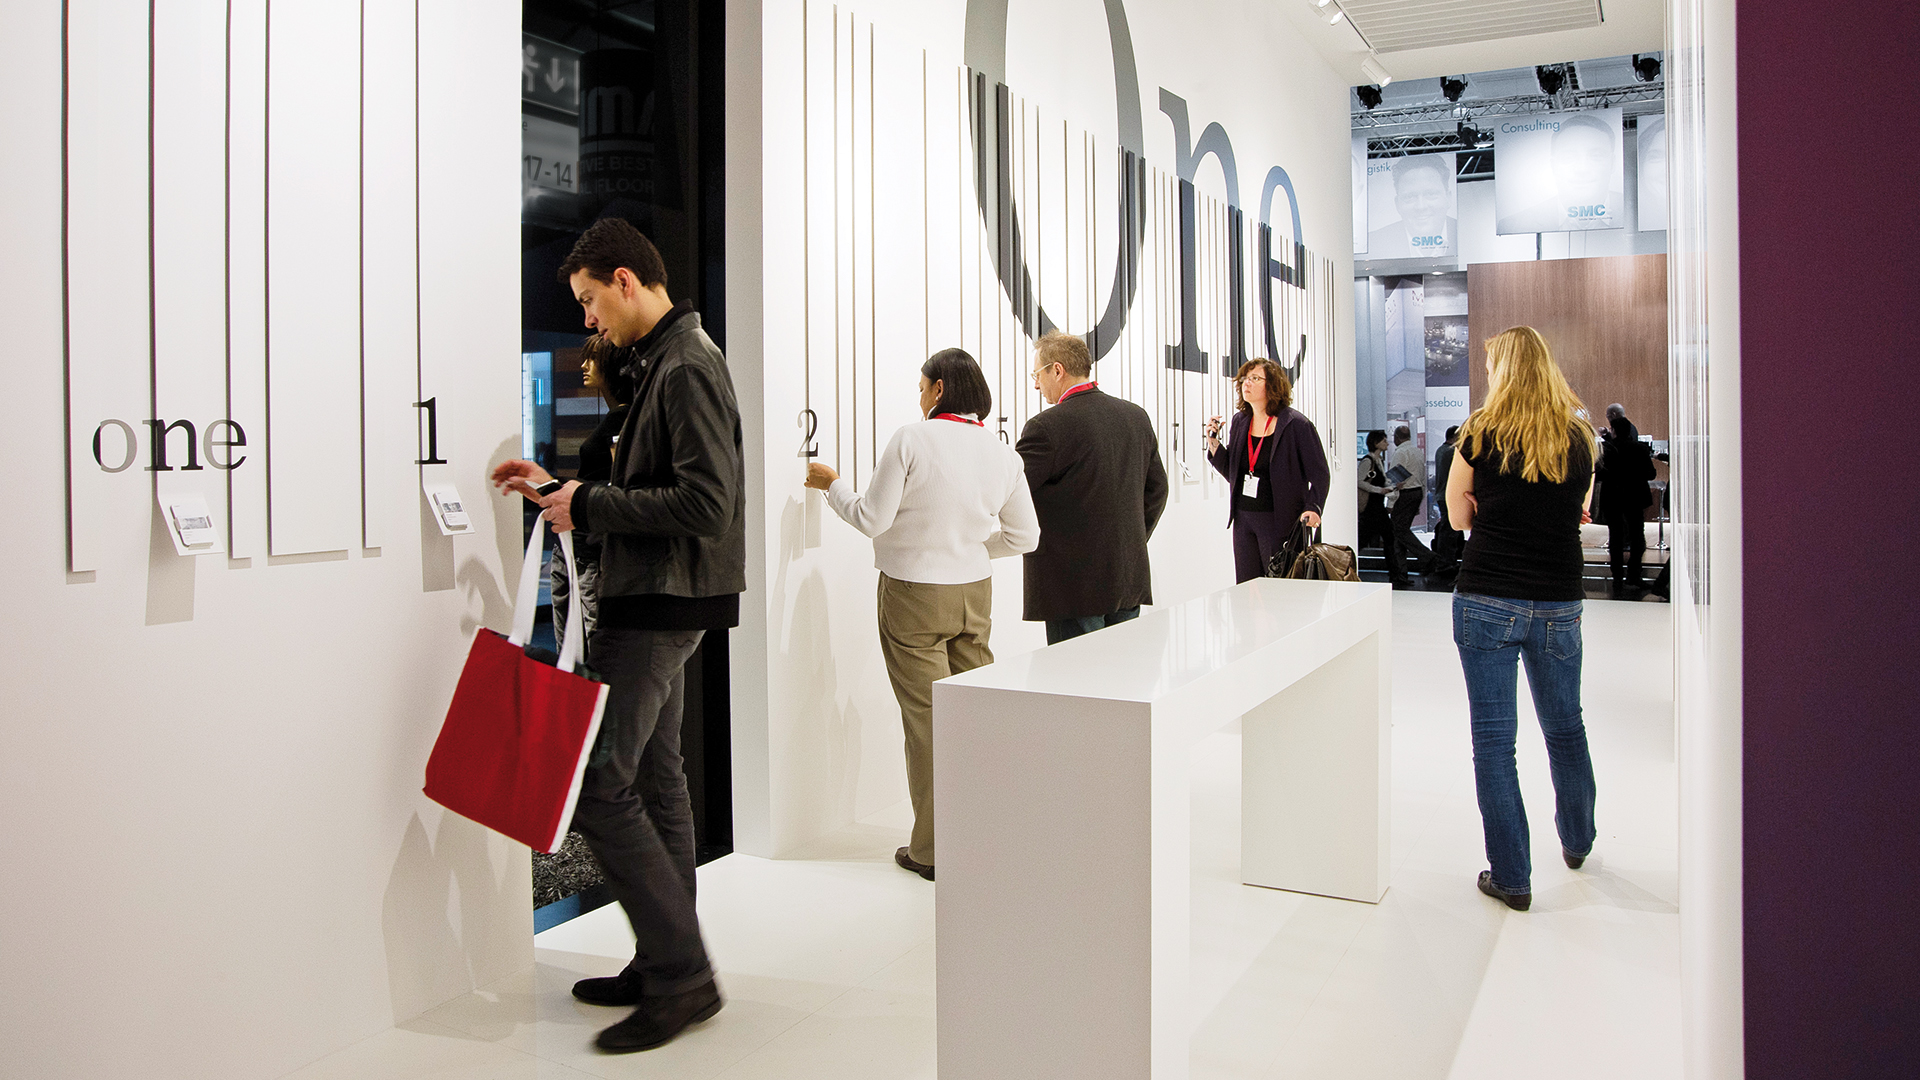 Dart stages the D'art Design Gruppe's own fair stand at the EuroShop 2011